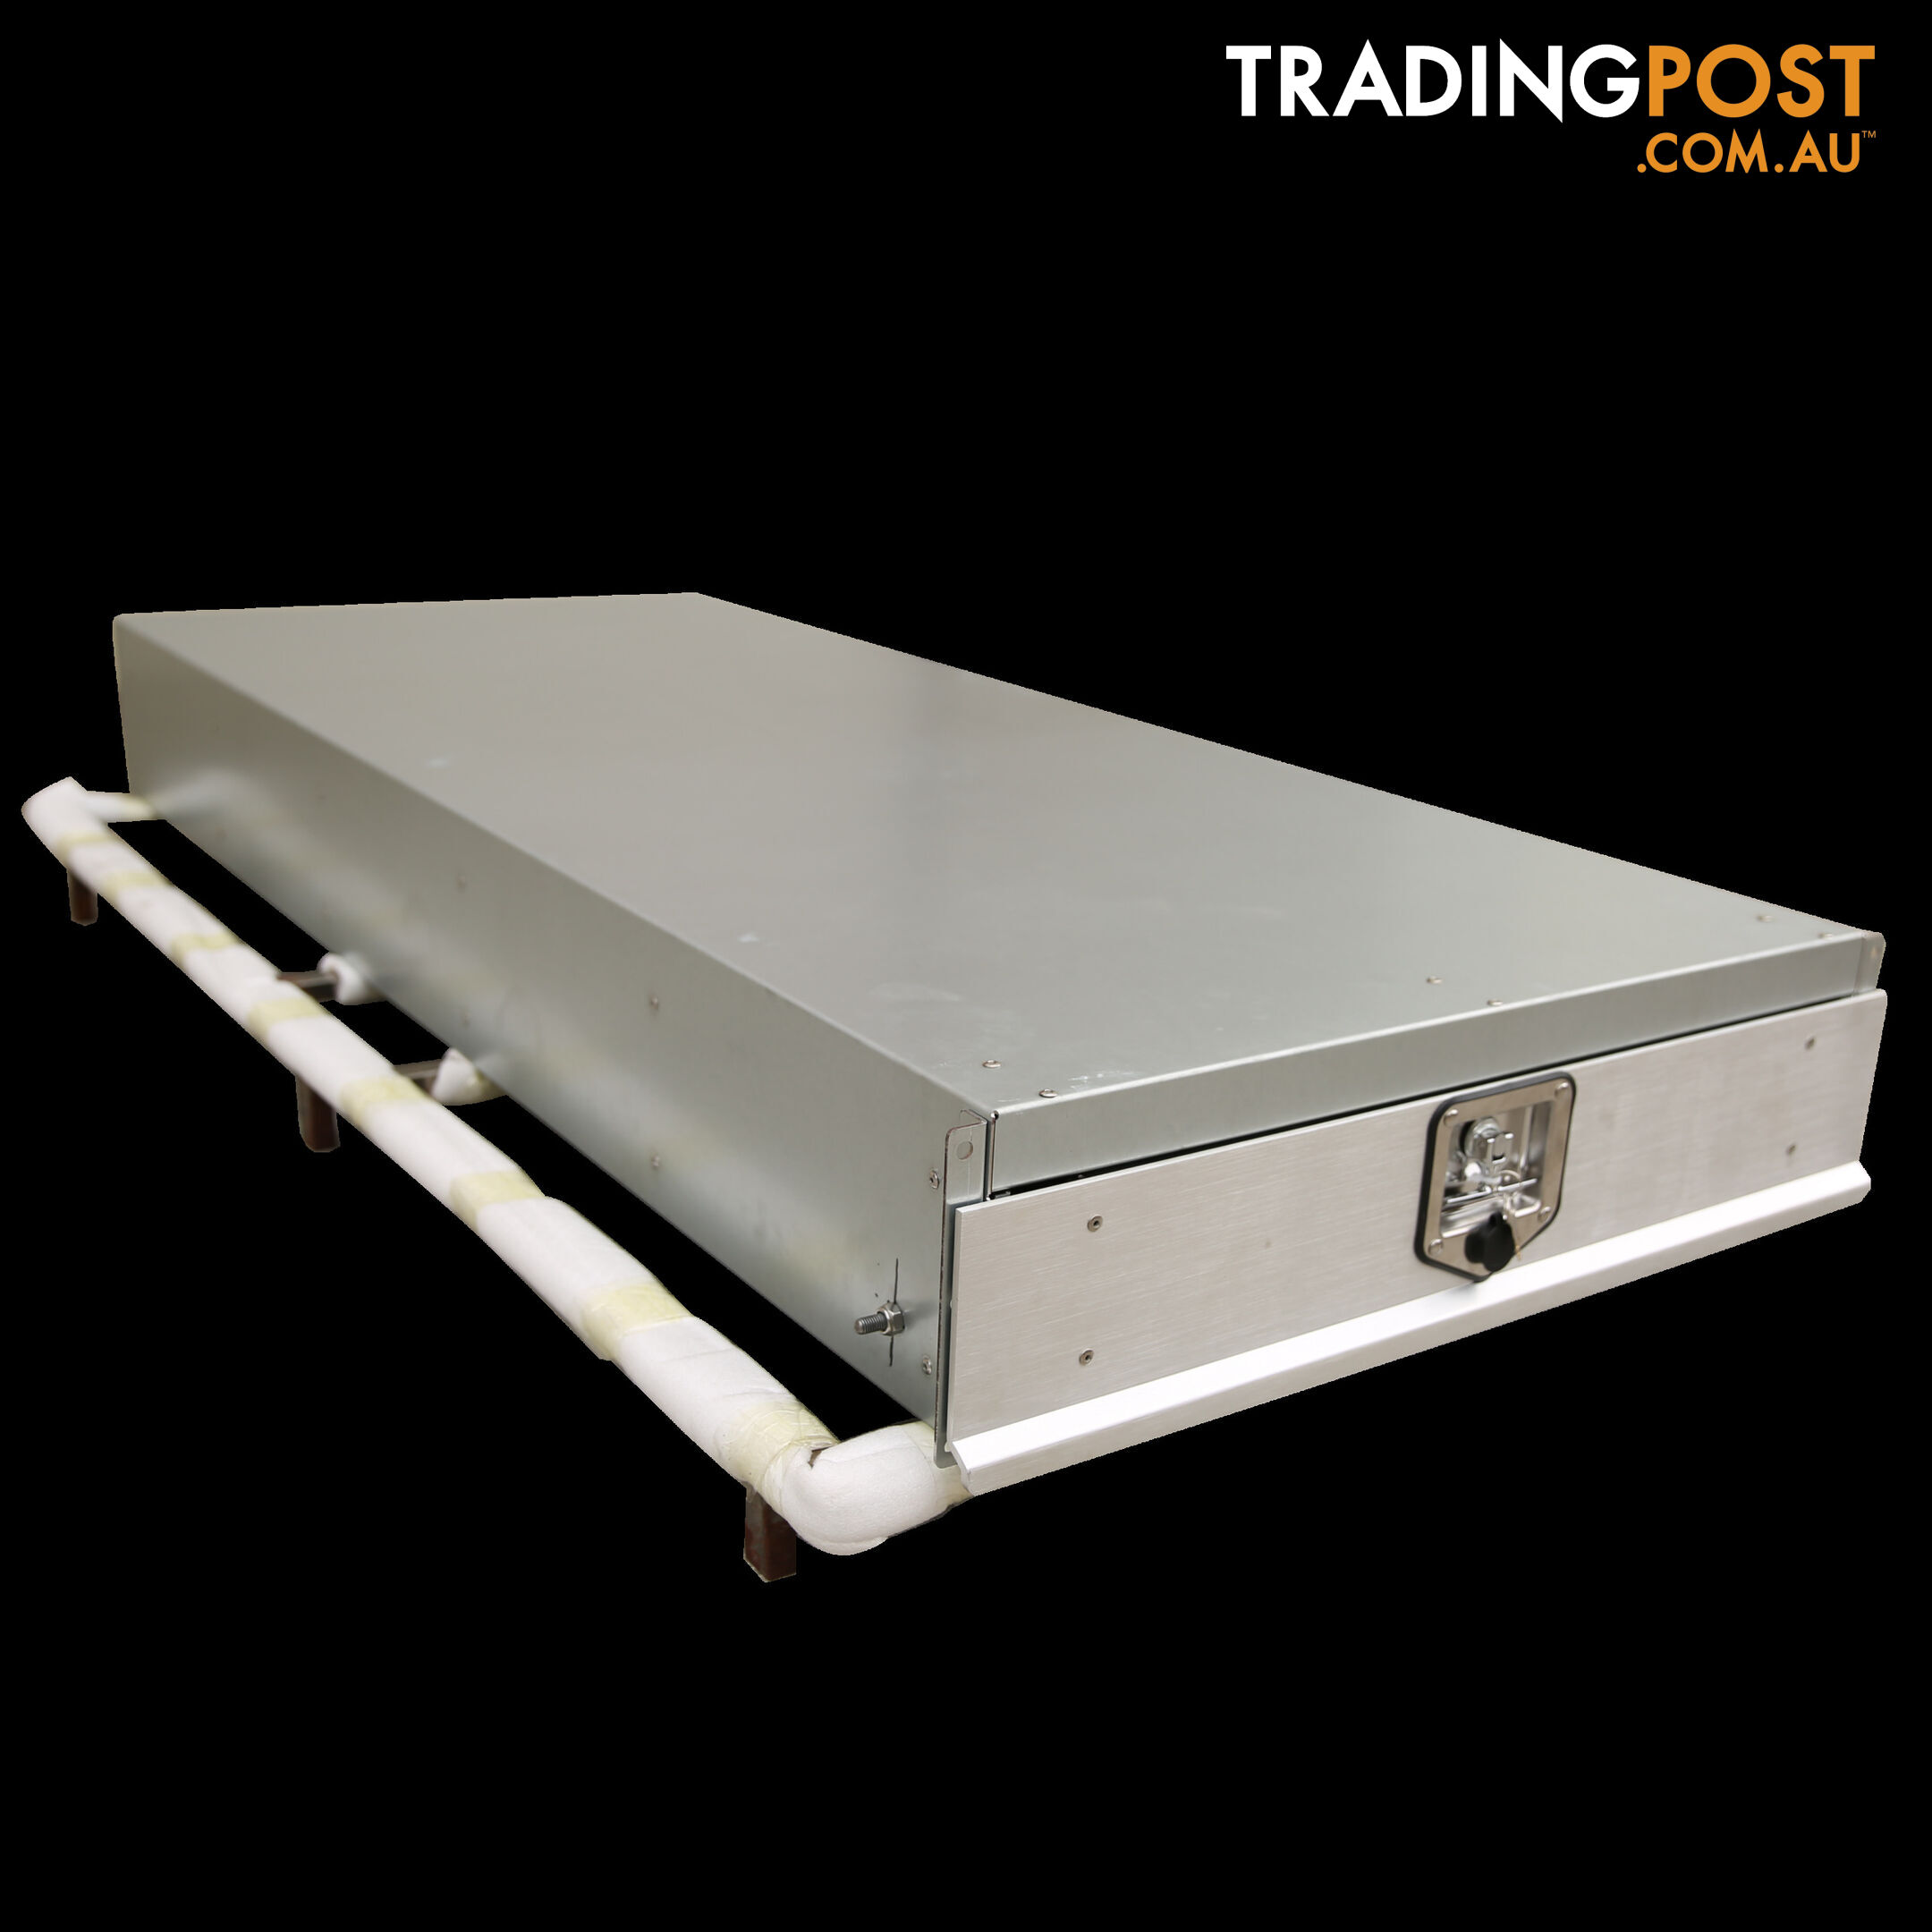 T1 TRUNDLE TRAY 1800MM